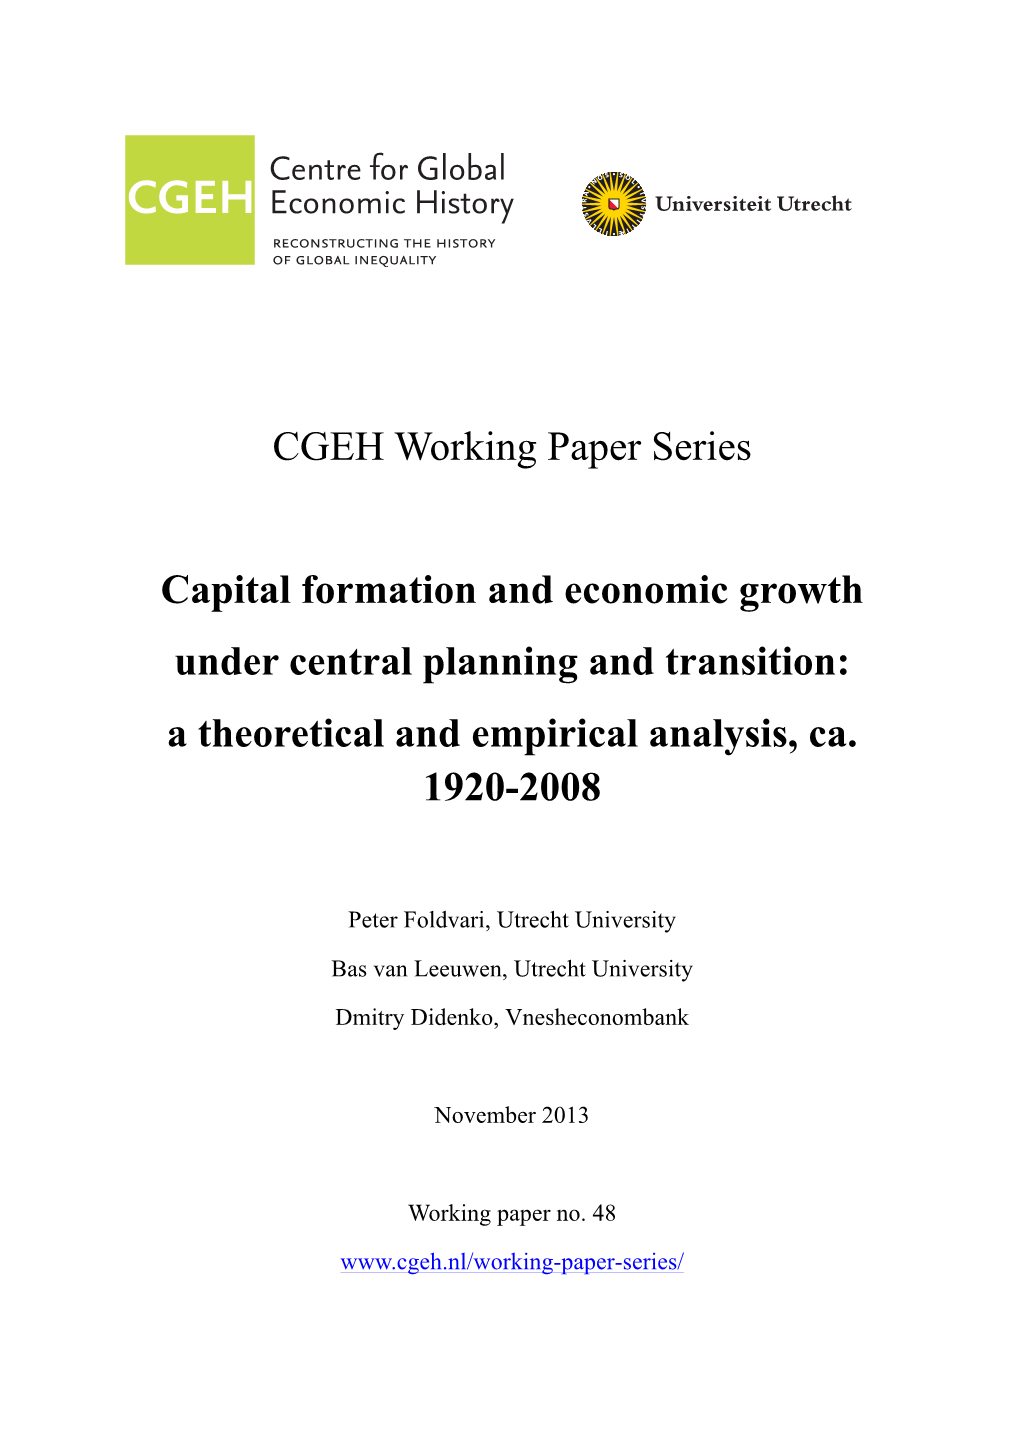 CGEH Working Paper Series Capital Formation and Economic Growth